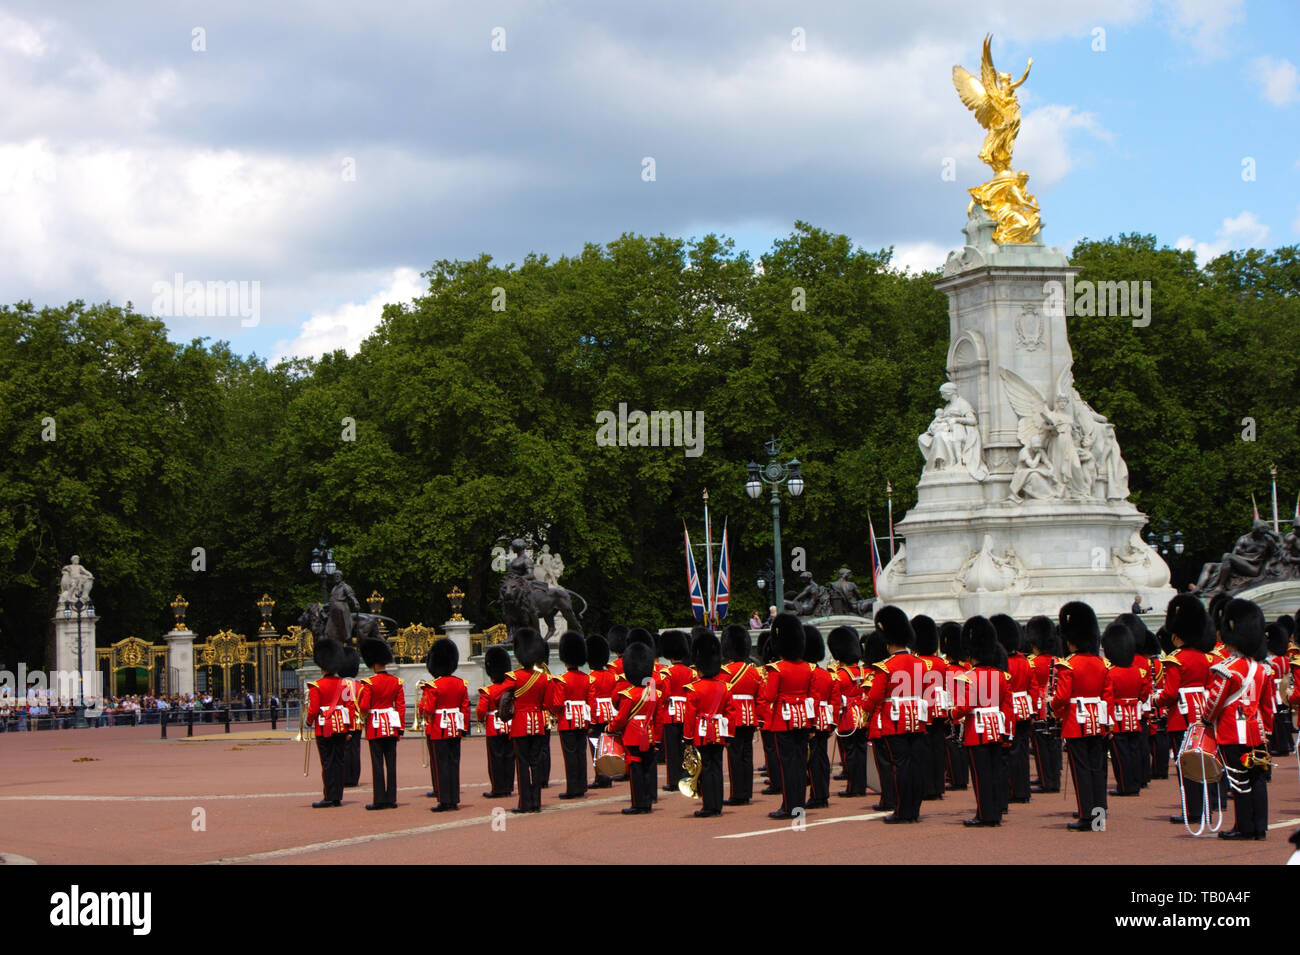 The British Queen's birthday celebration is on 8th June. Two weeks in advance a rehearsal takes place. Royal palace guards marching in front of the Bu Stock Photo